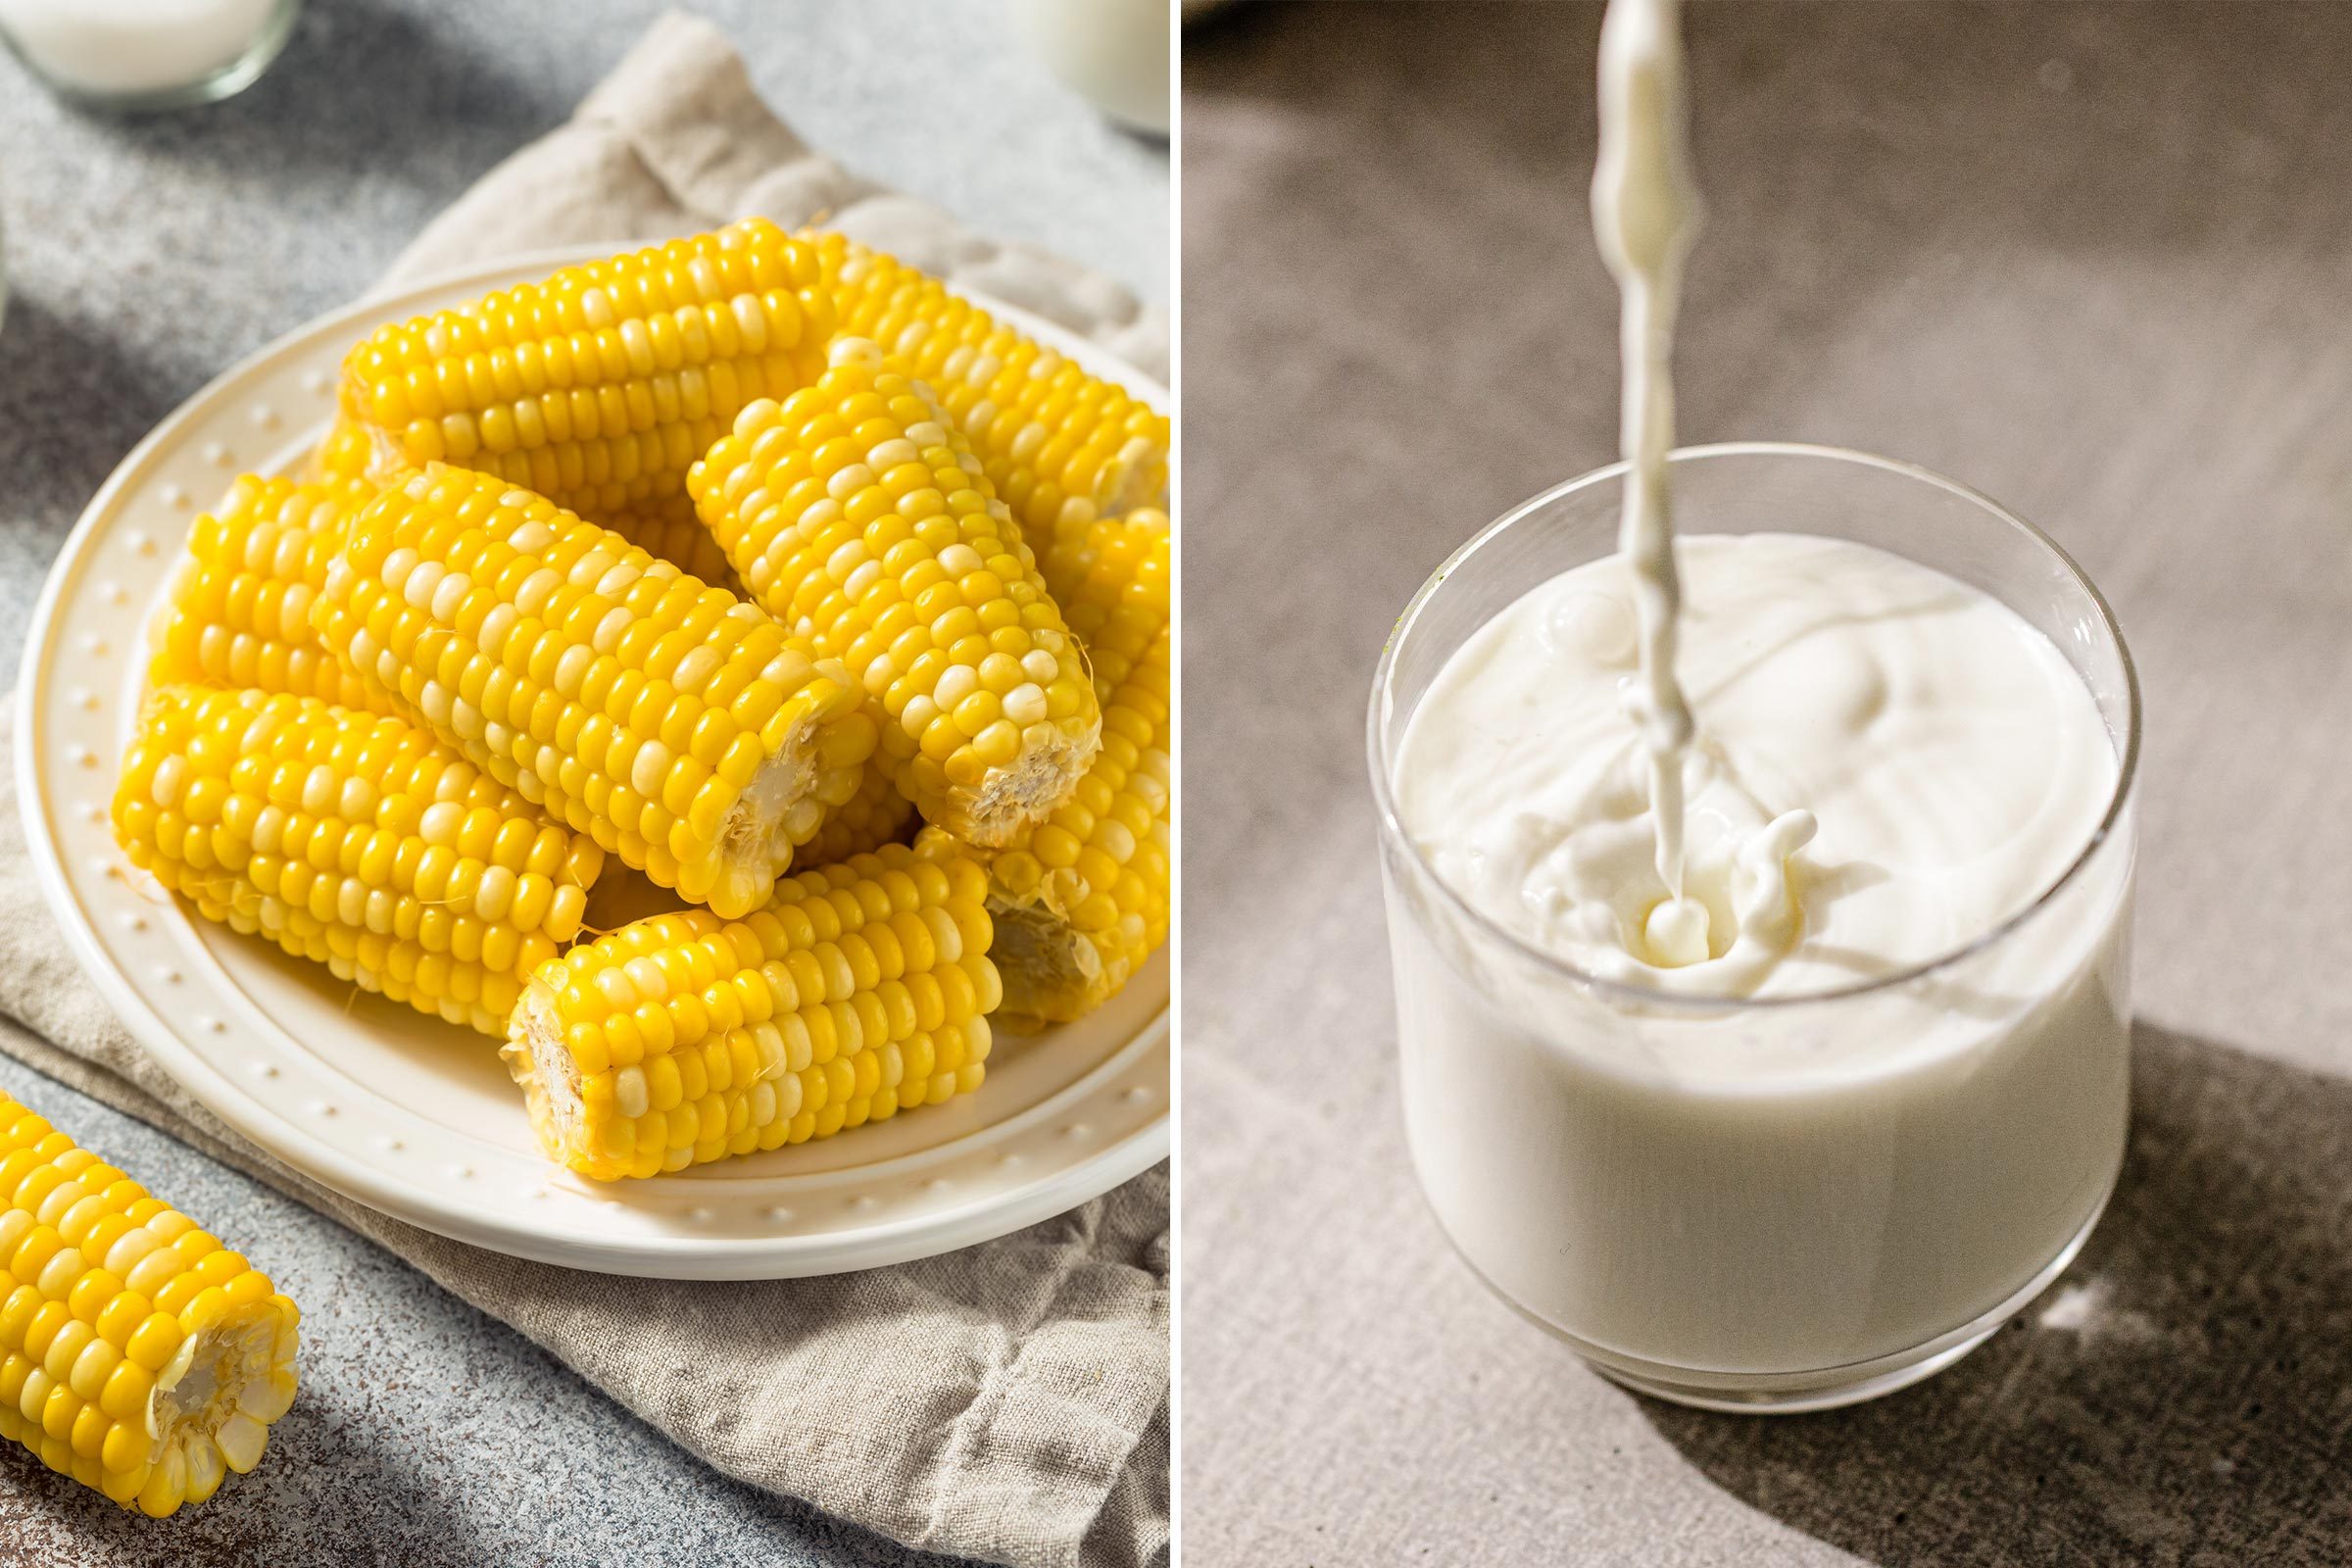 side by side of corn on the cob on a plate and a glass of milk